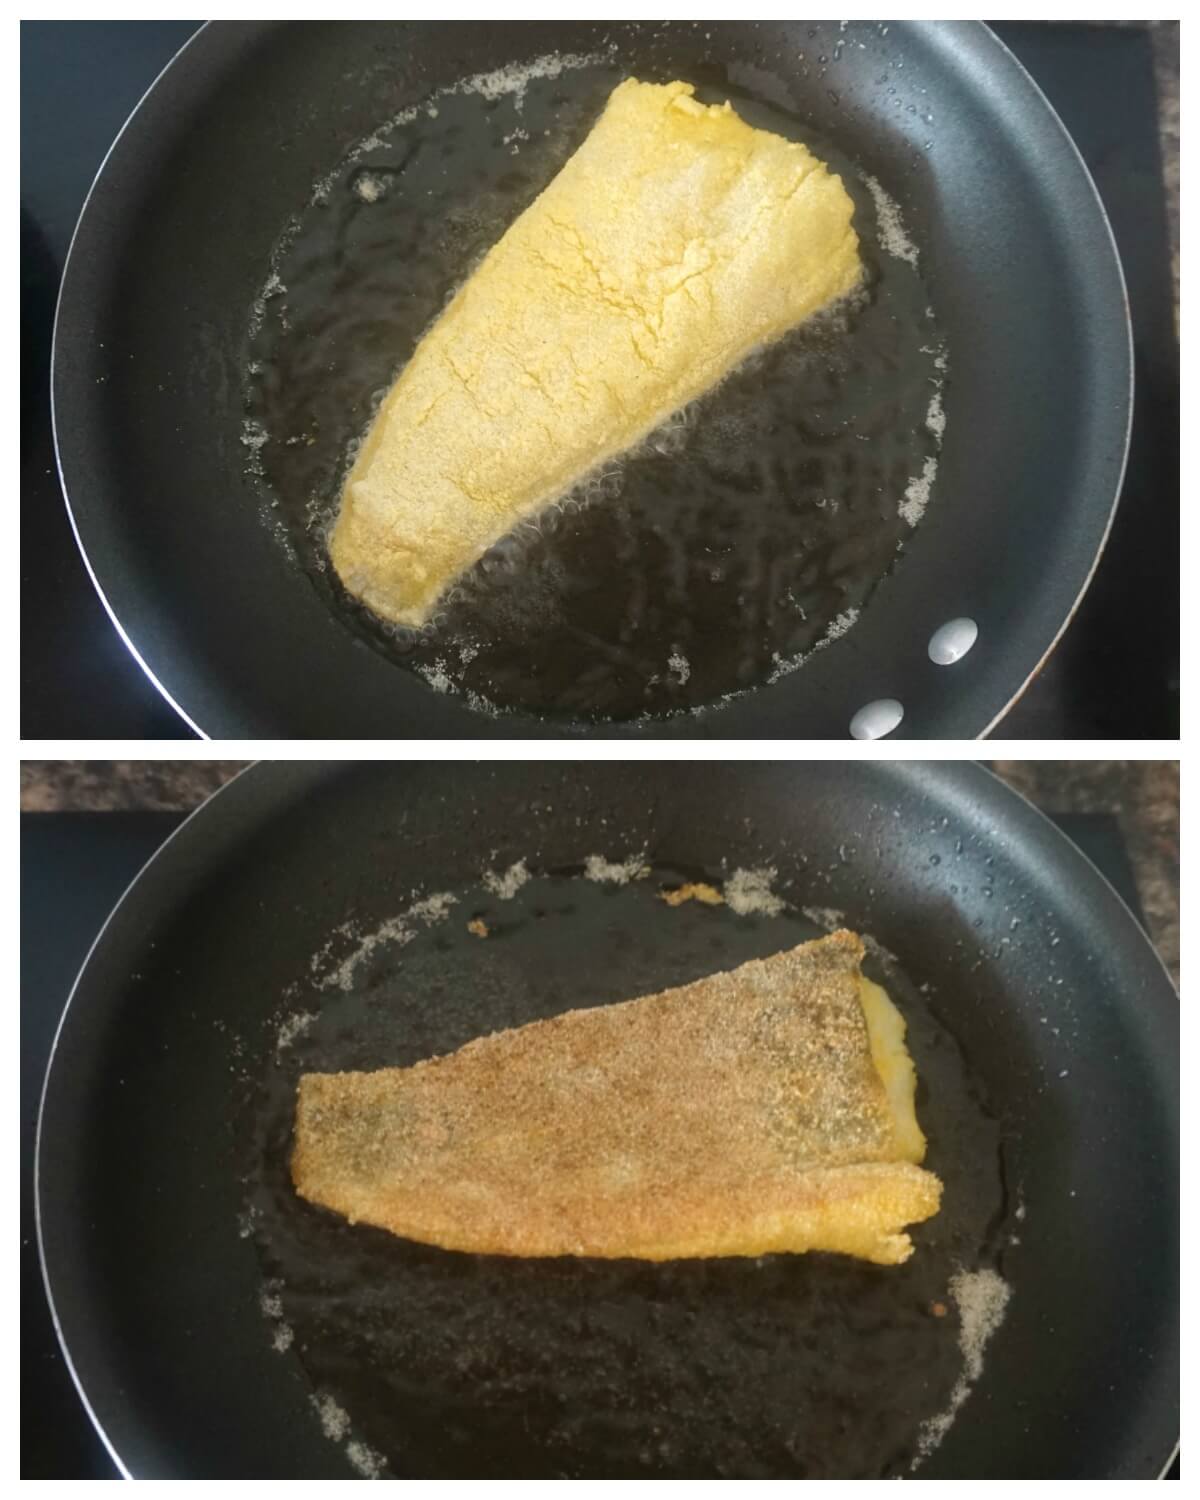 Collage of 2 photos to show how to make cornmeal-crusted fried cod fillet.